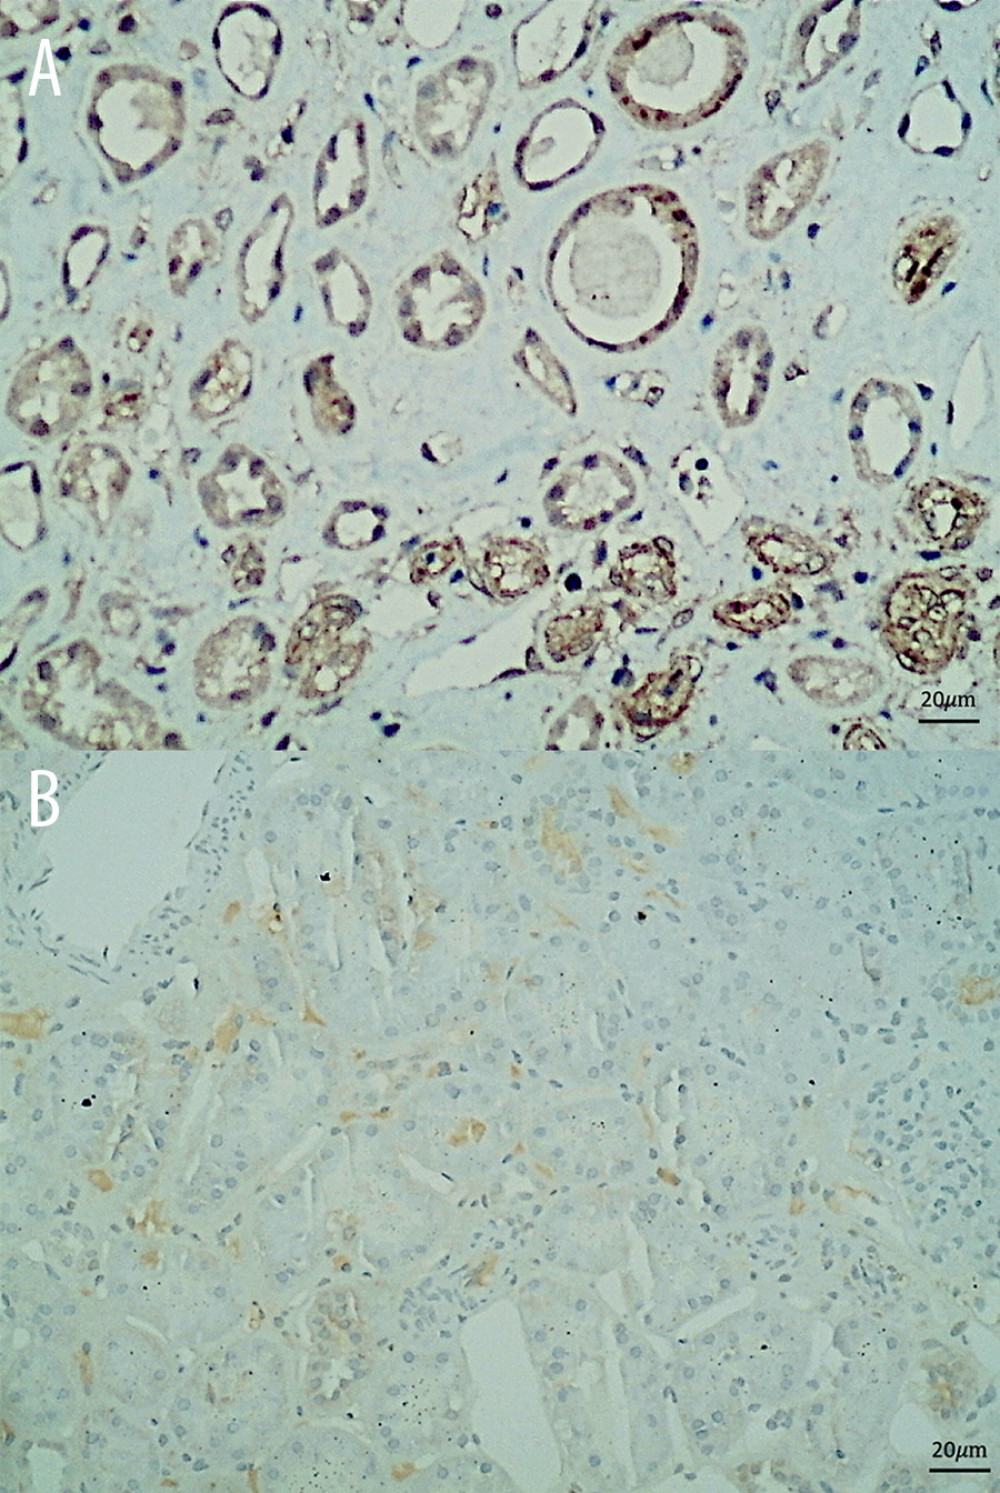 Immunohistochemical staining of CMV in (A) renal tubules of the patient compared with (B) control tissue from the kidney of a normal person shows CMV positivity in the tubules of the patients.